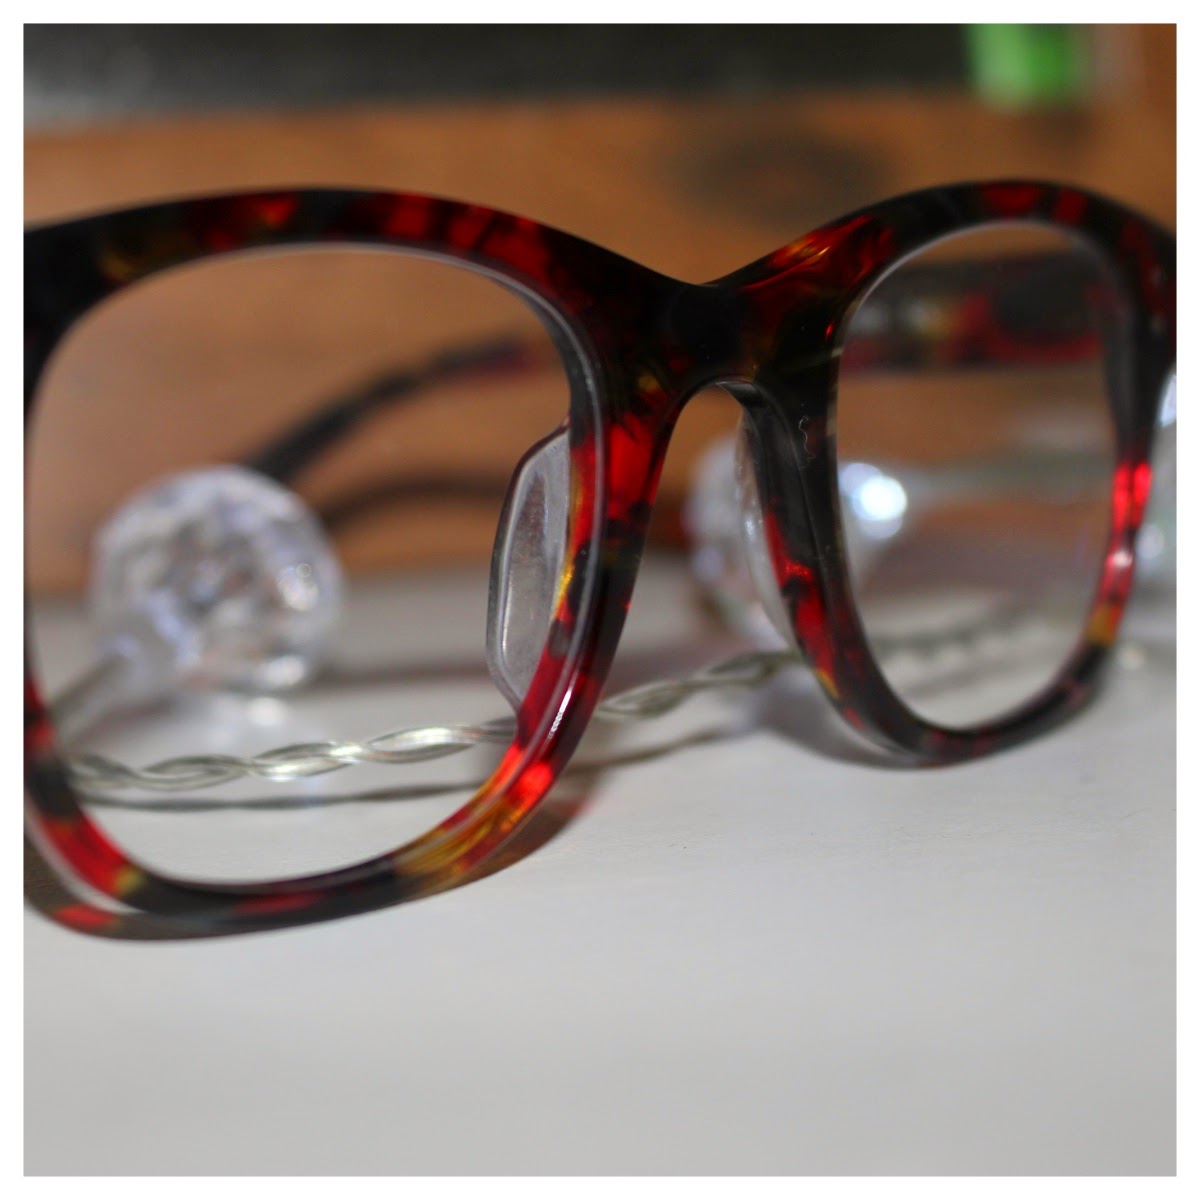 Not Your Average: Firmoo Glasses Review